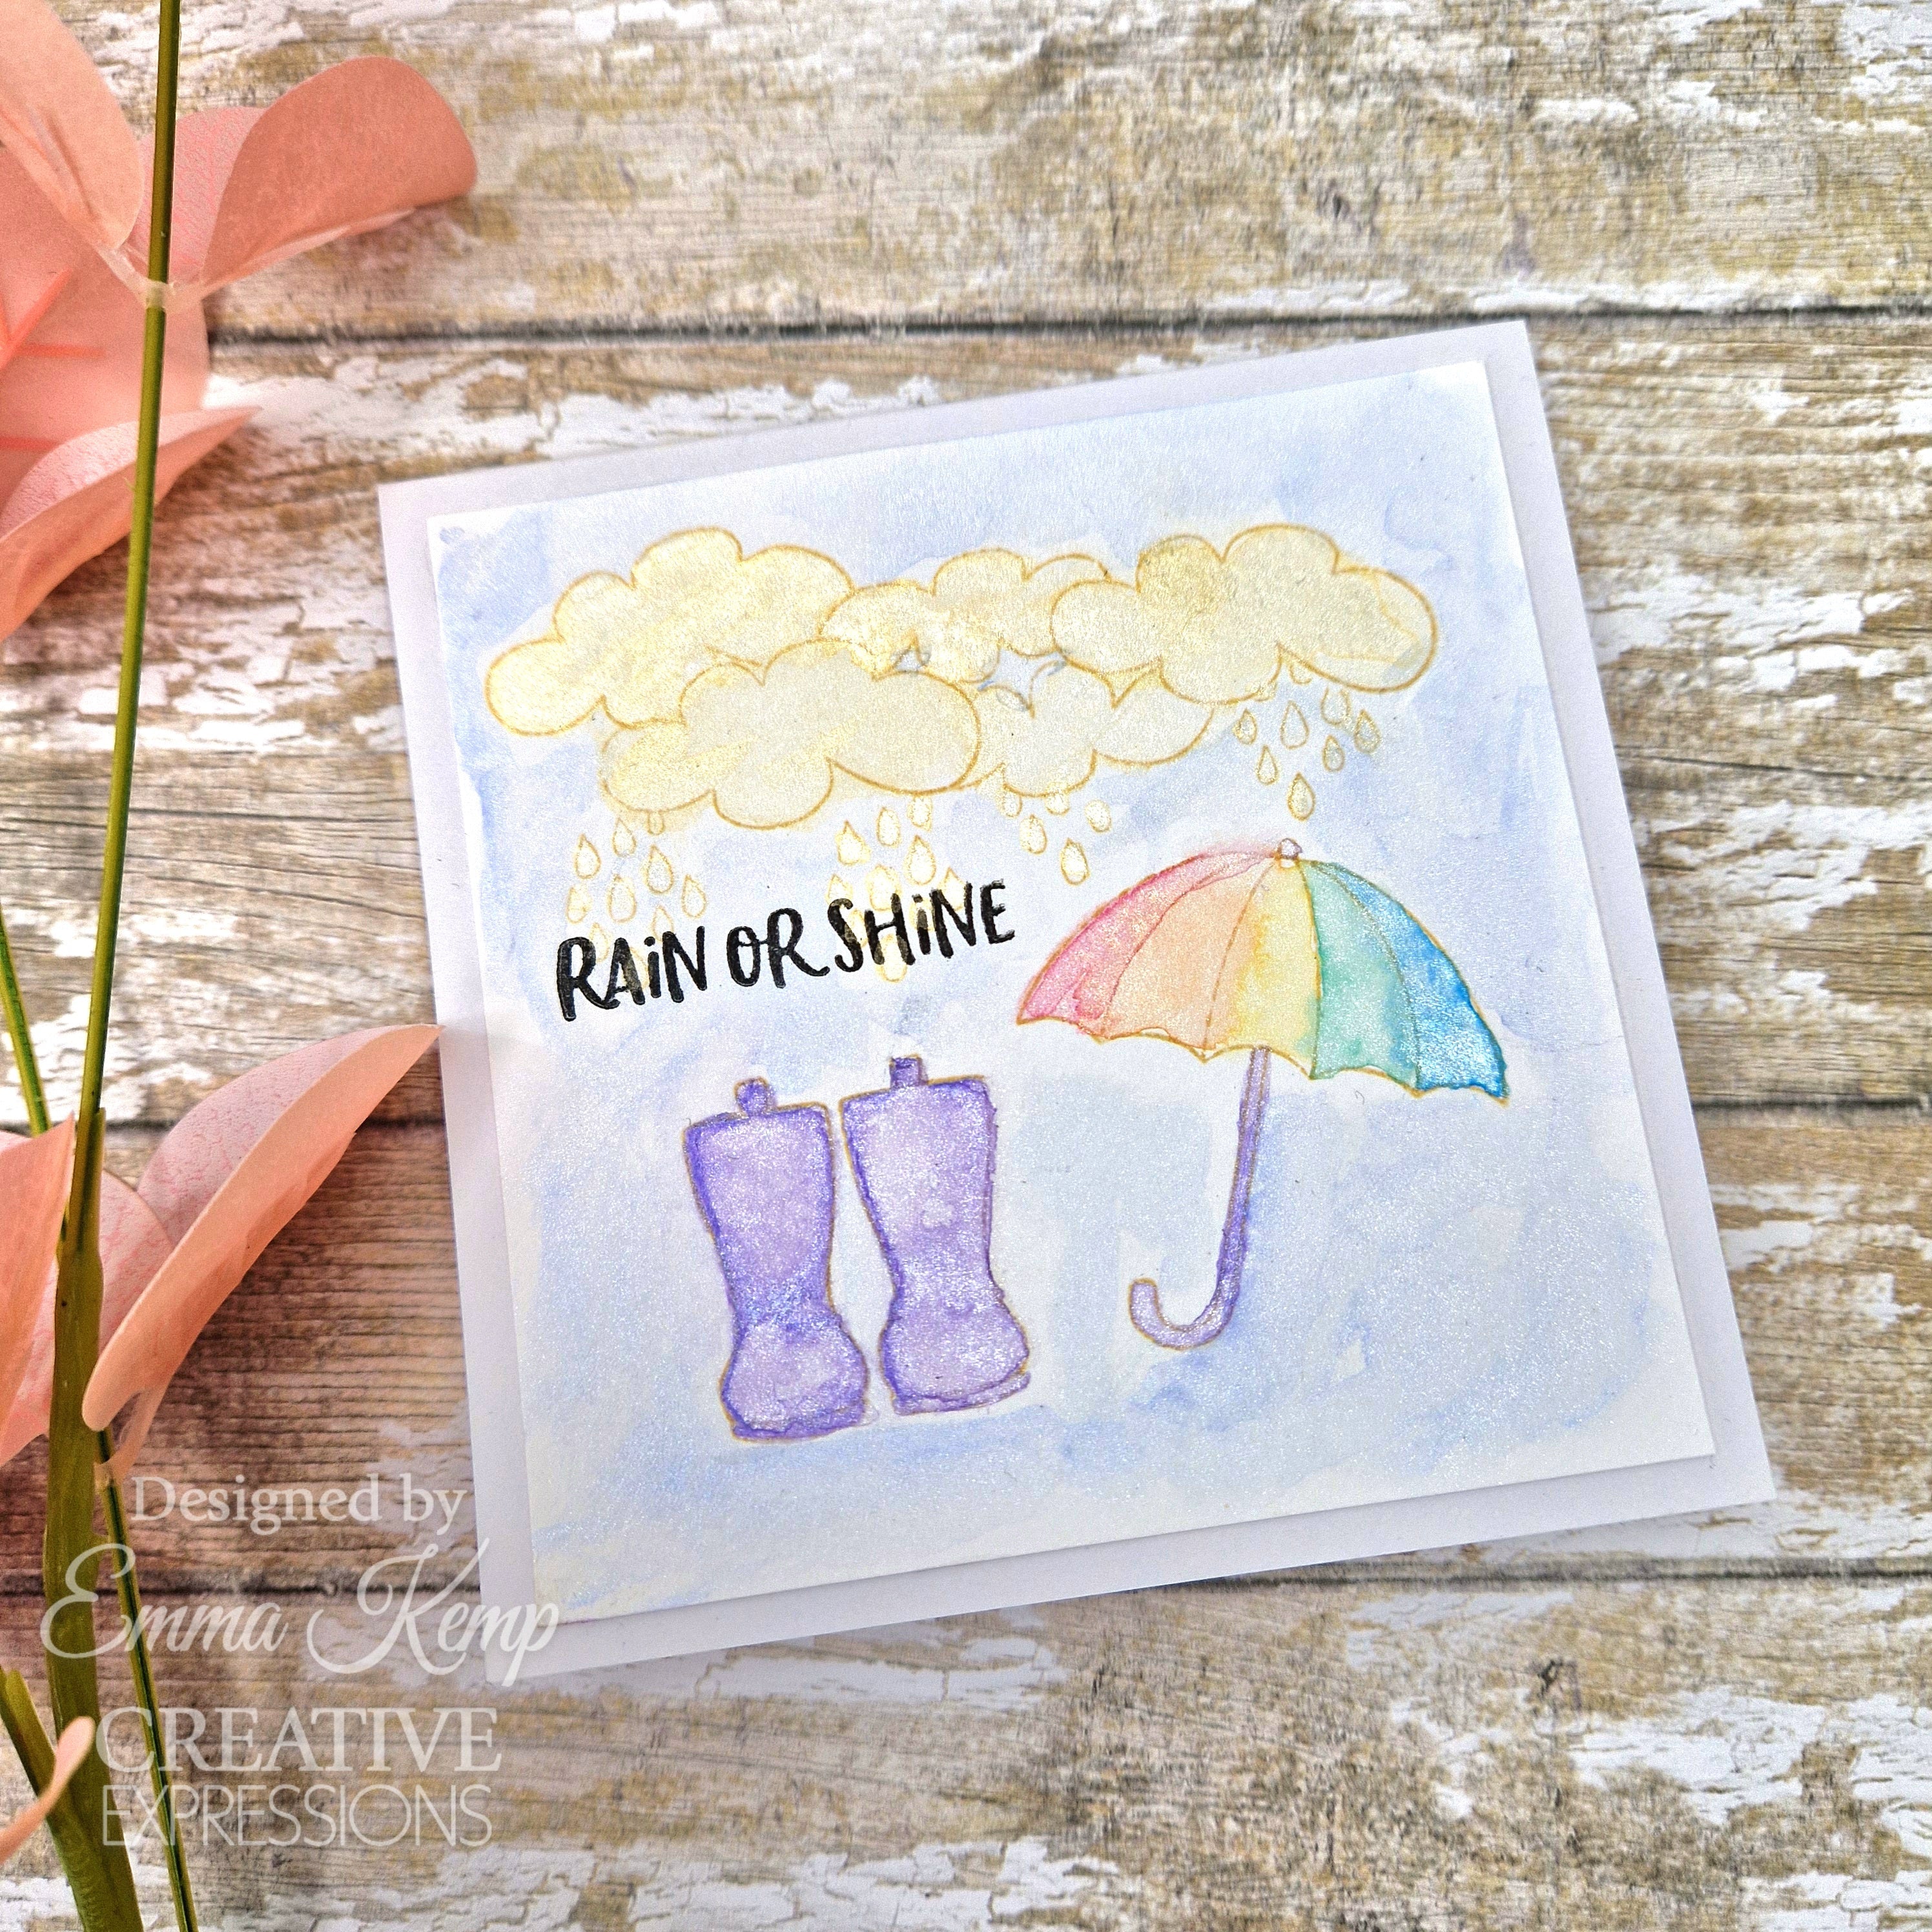 Creative Expressions Jane's Doodles Rain or Shine 4 in x 6 in Clear Stamp Set